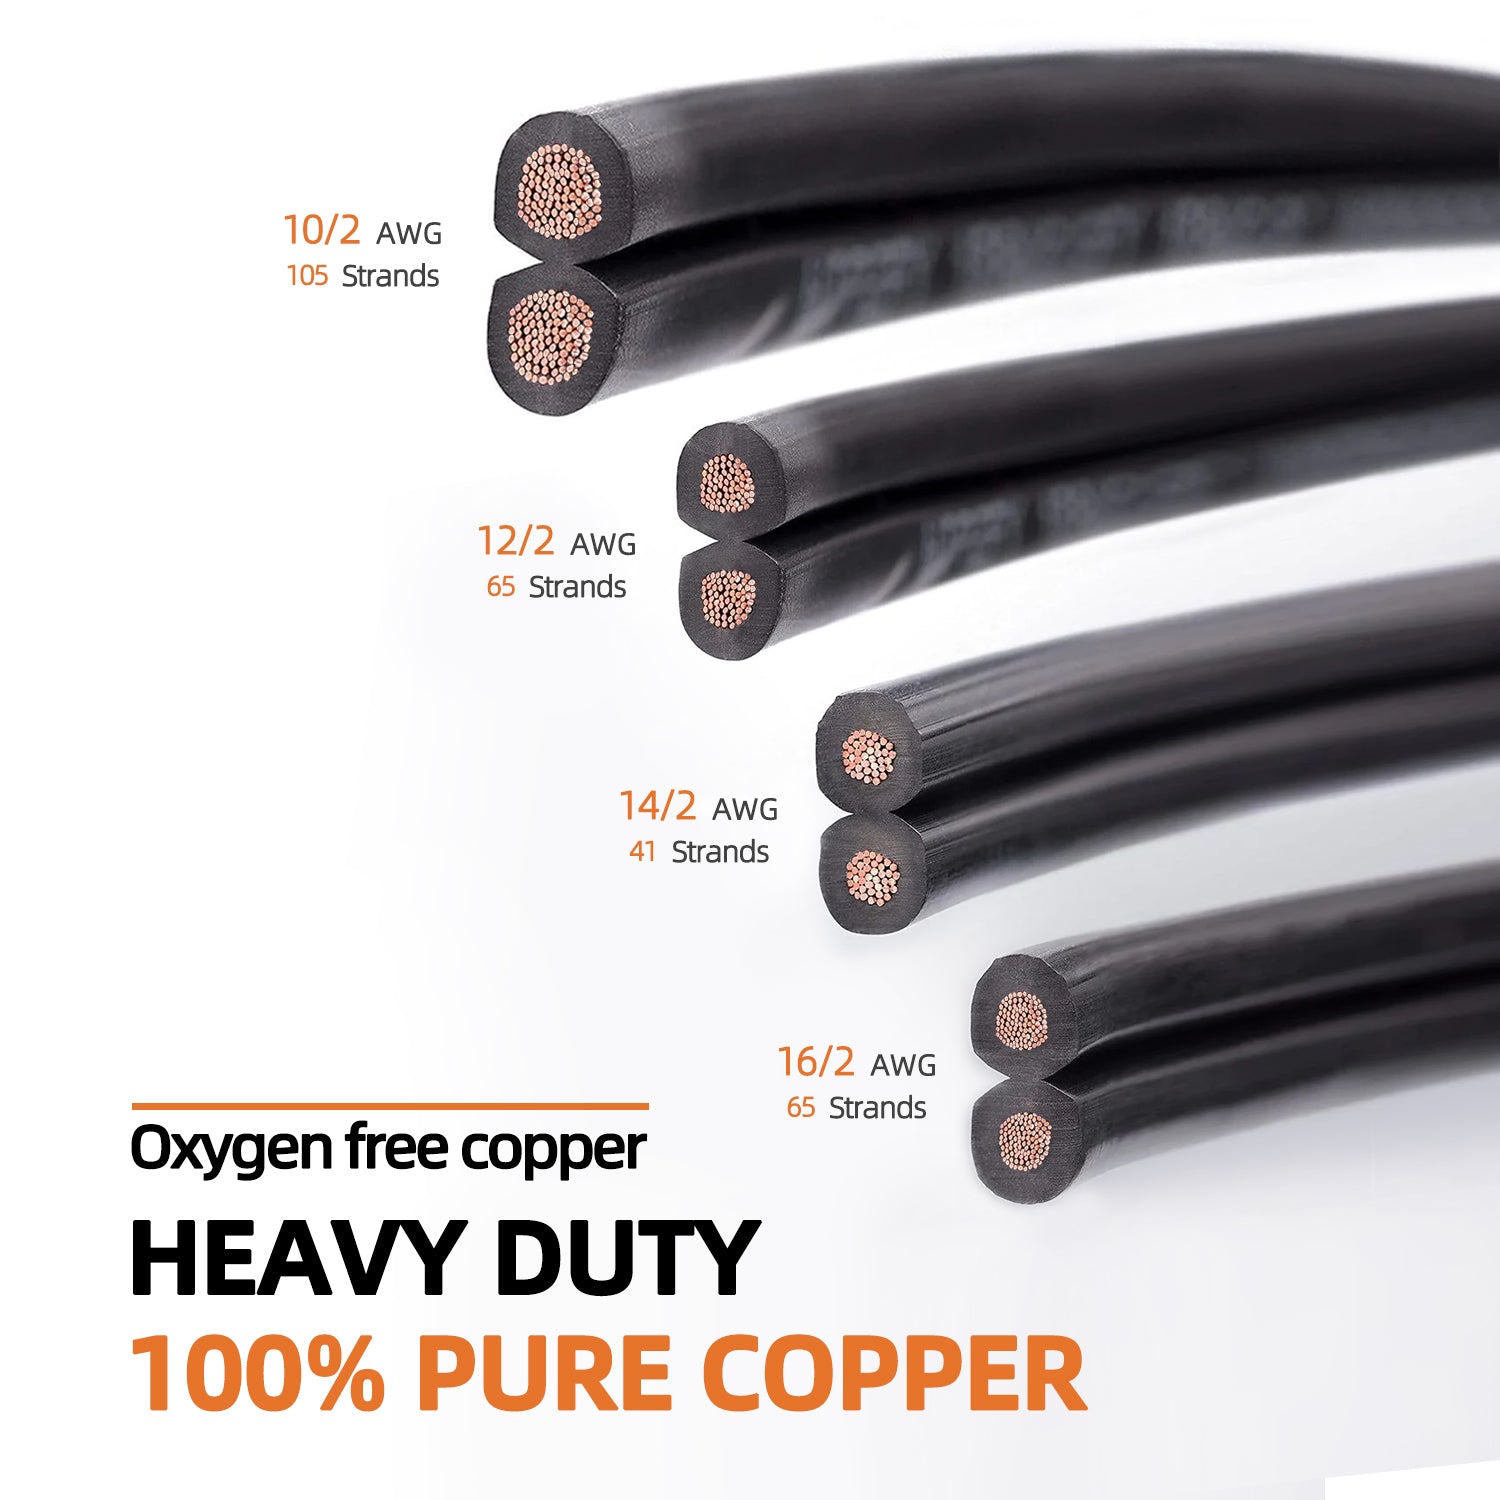 Different gauges of COLOER's heavy-duty 100% pure copper landscape wires, including 10/2 AWG with 105 strands, 12/2 AWG with 65 strands, 14/2 AWG with 41 strands, and 16/2 AWG with 65 strands, suitable for outdoor lighting installations.